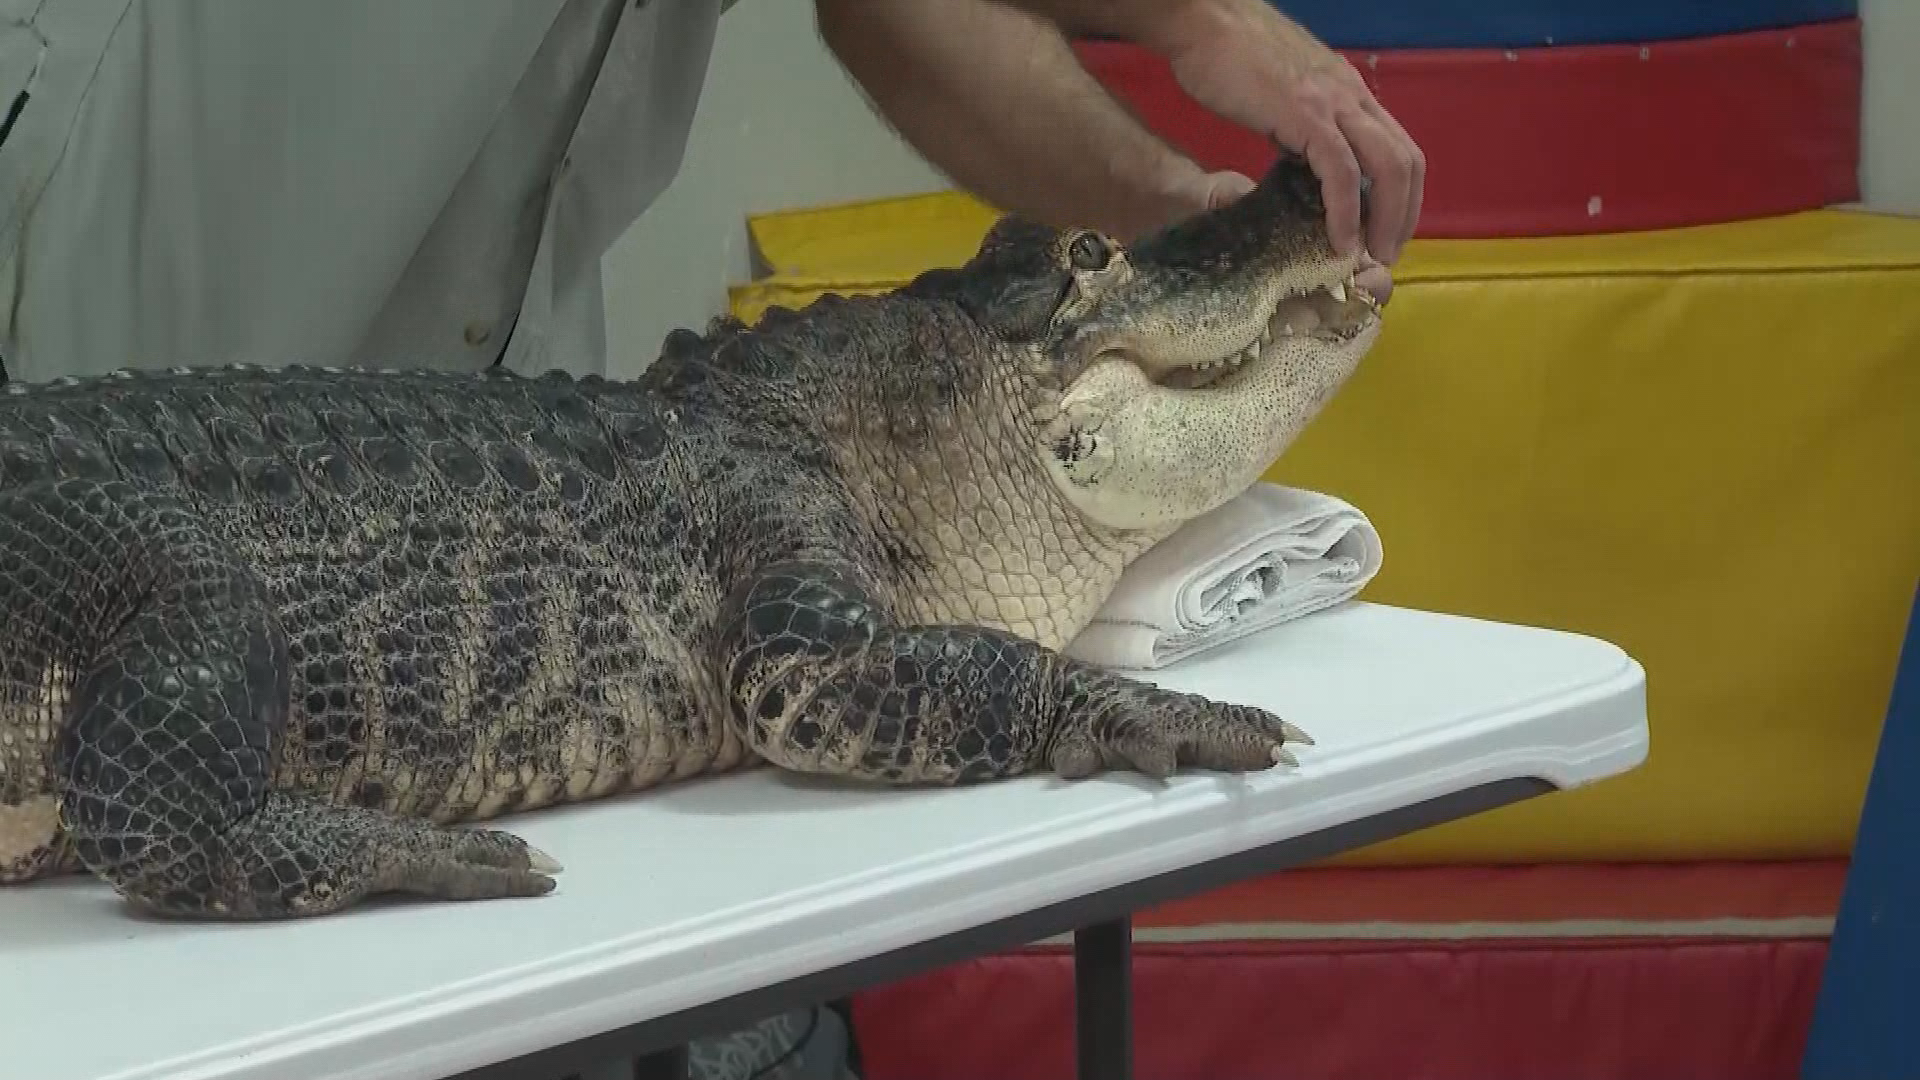 FLORIDA -- Bubba is a 195-pound therapy alligator who visits kids with autism. The kids even get to touch him, which provides them with an enriching experience.